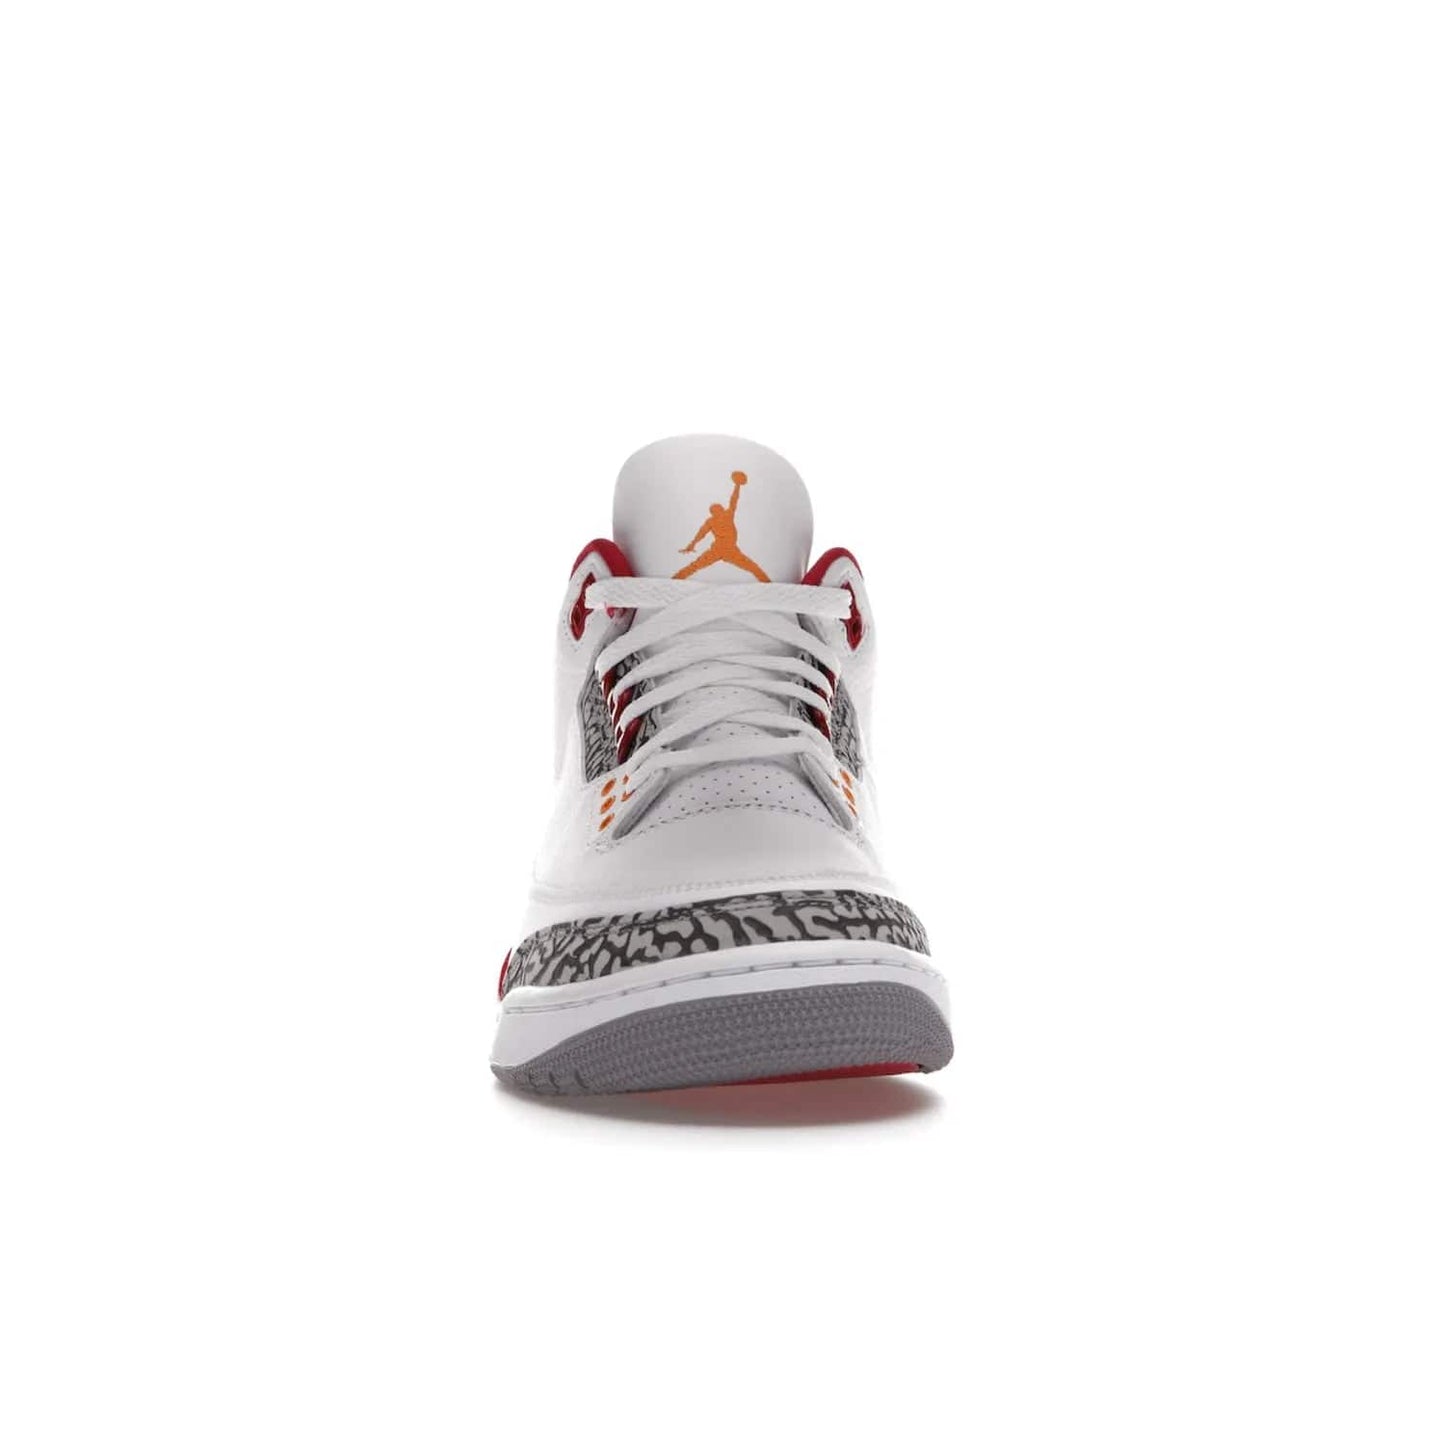 Jordan 3 Retro Cardinal Red - Image 10 - Only at www.BallersClubKickz.com - Air Jordan 3 Retro Cardinal Red combines classic style and modern appeal - white tumbled leather, signature Elephant Print overlays, cardinal red midsoles, Jumpman logo embroidery. Available Feb 2022.